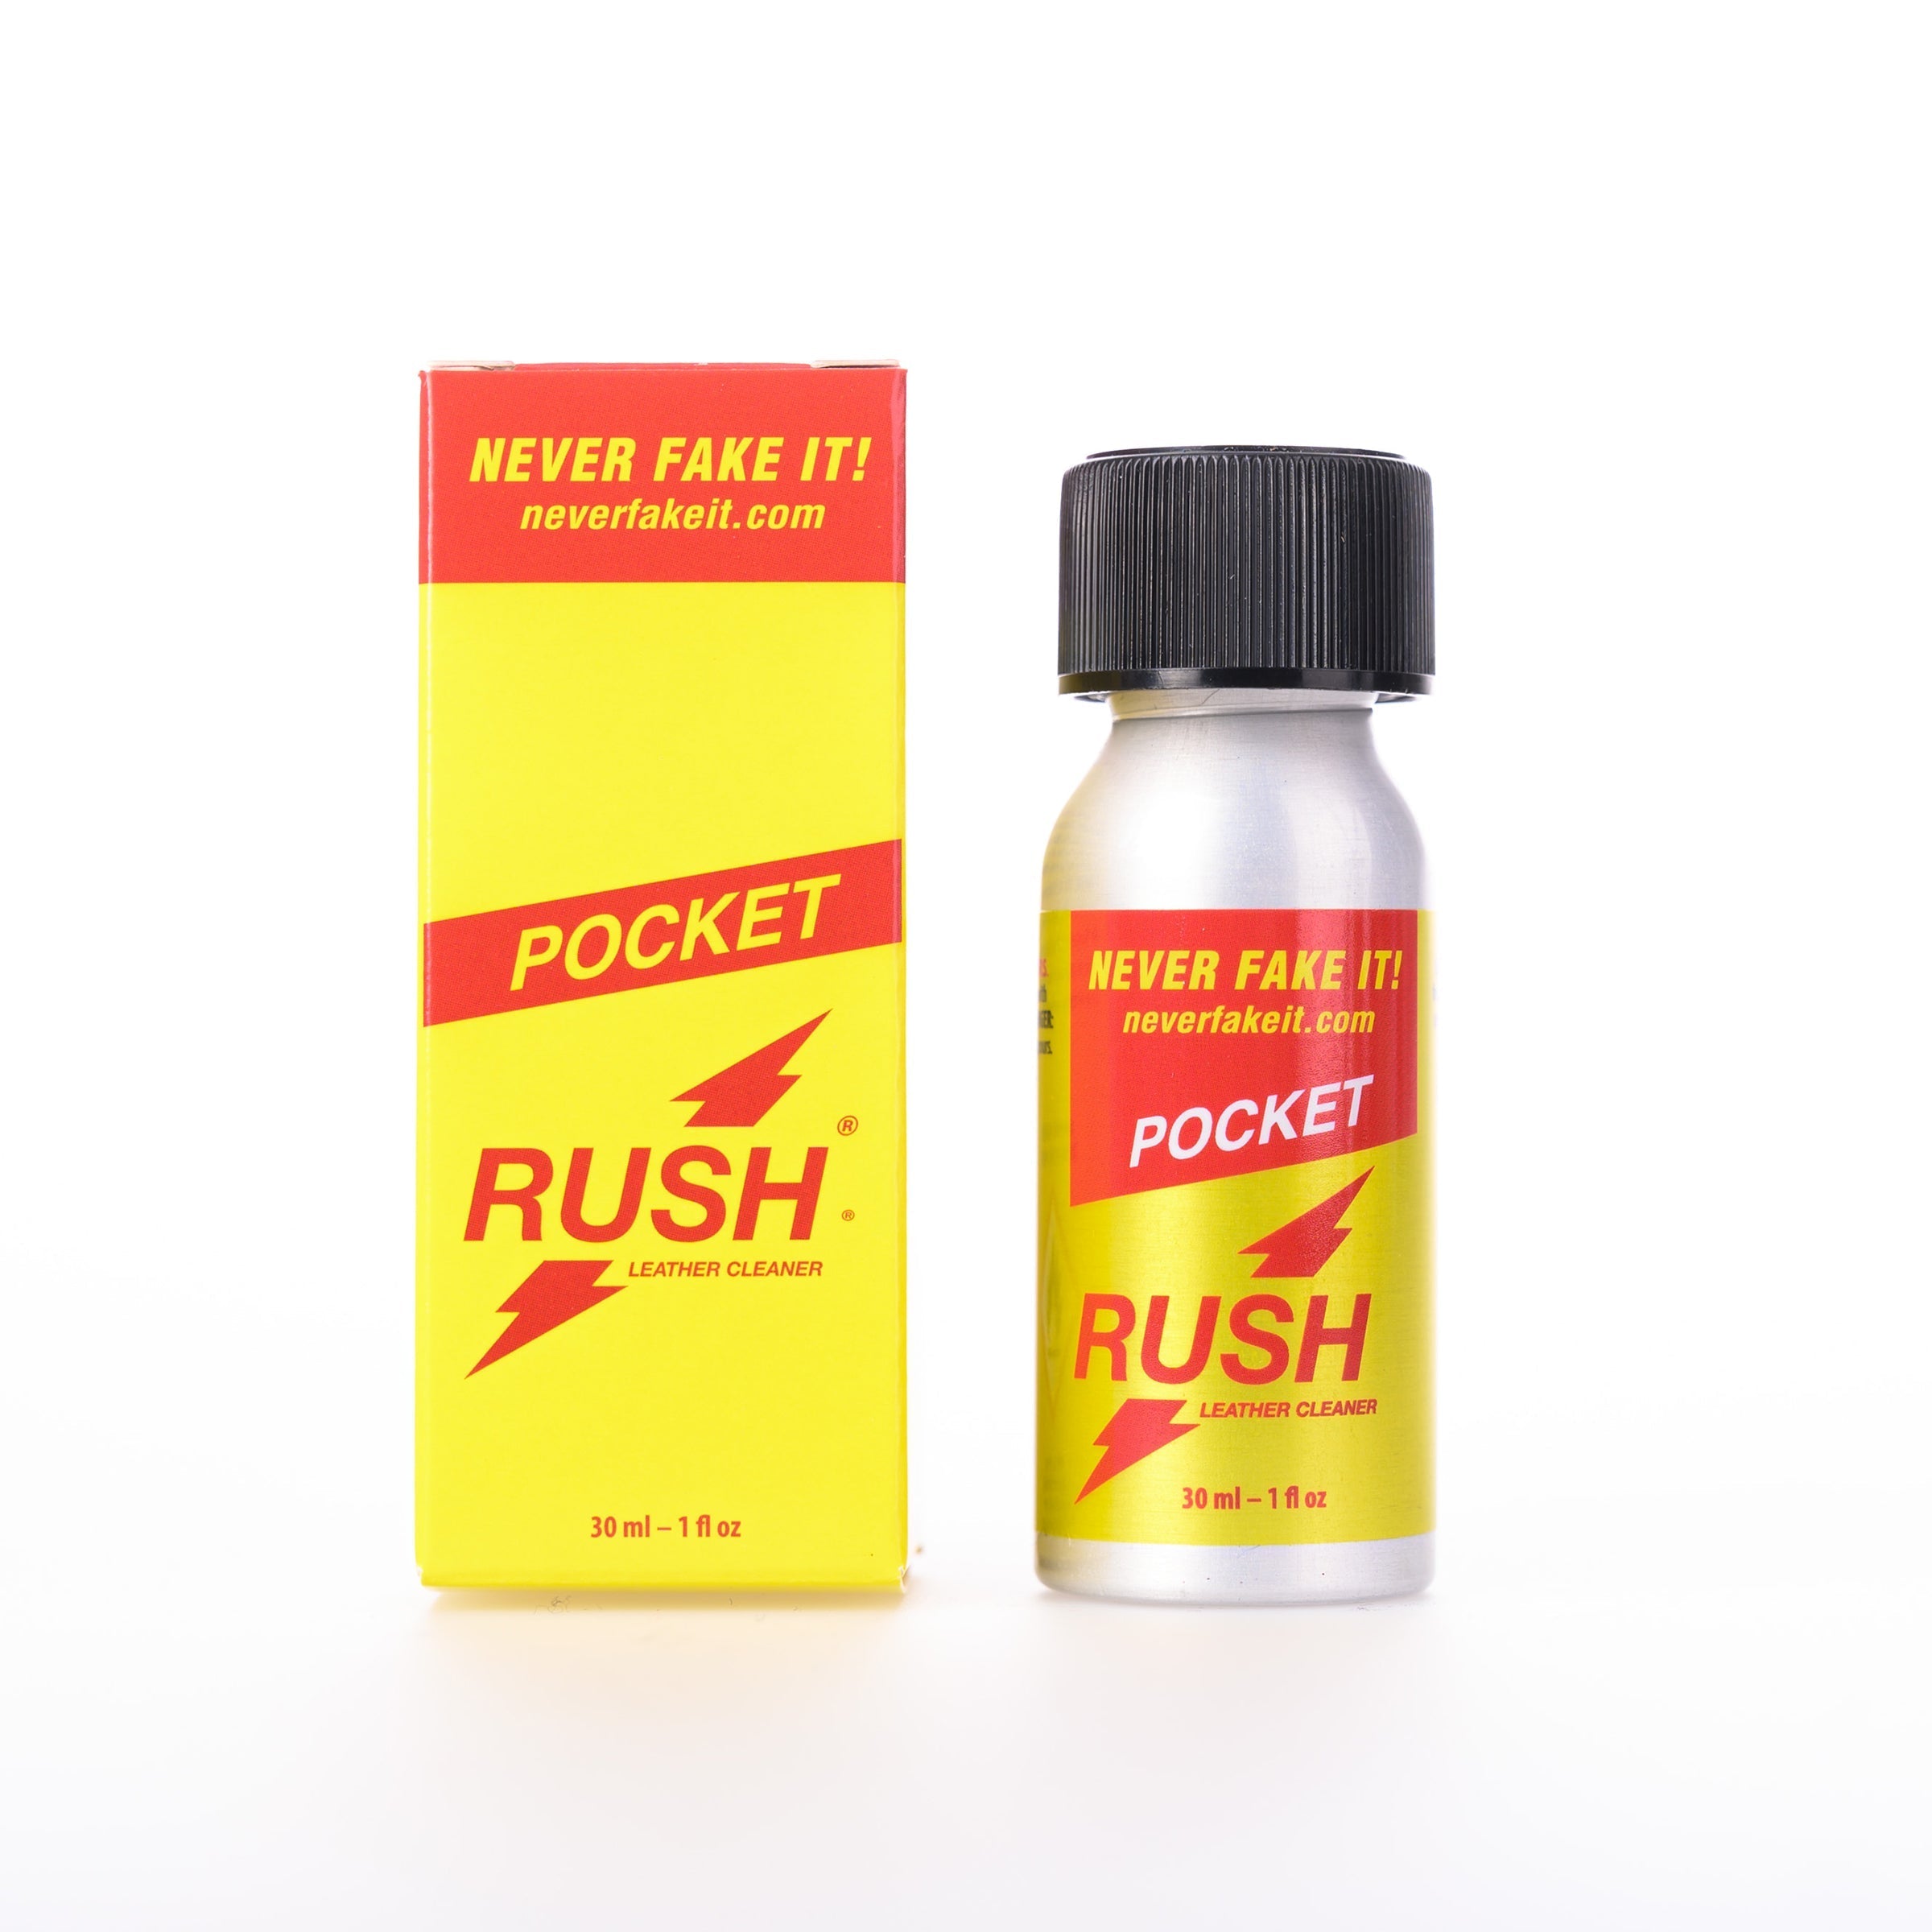 Pocket Rush 24ml, POPPERS UK, POPPERS USA, FREE DELIVERY, NEXT DAY DELIVERY